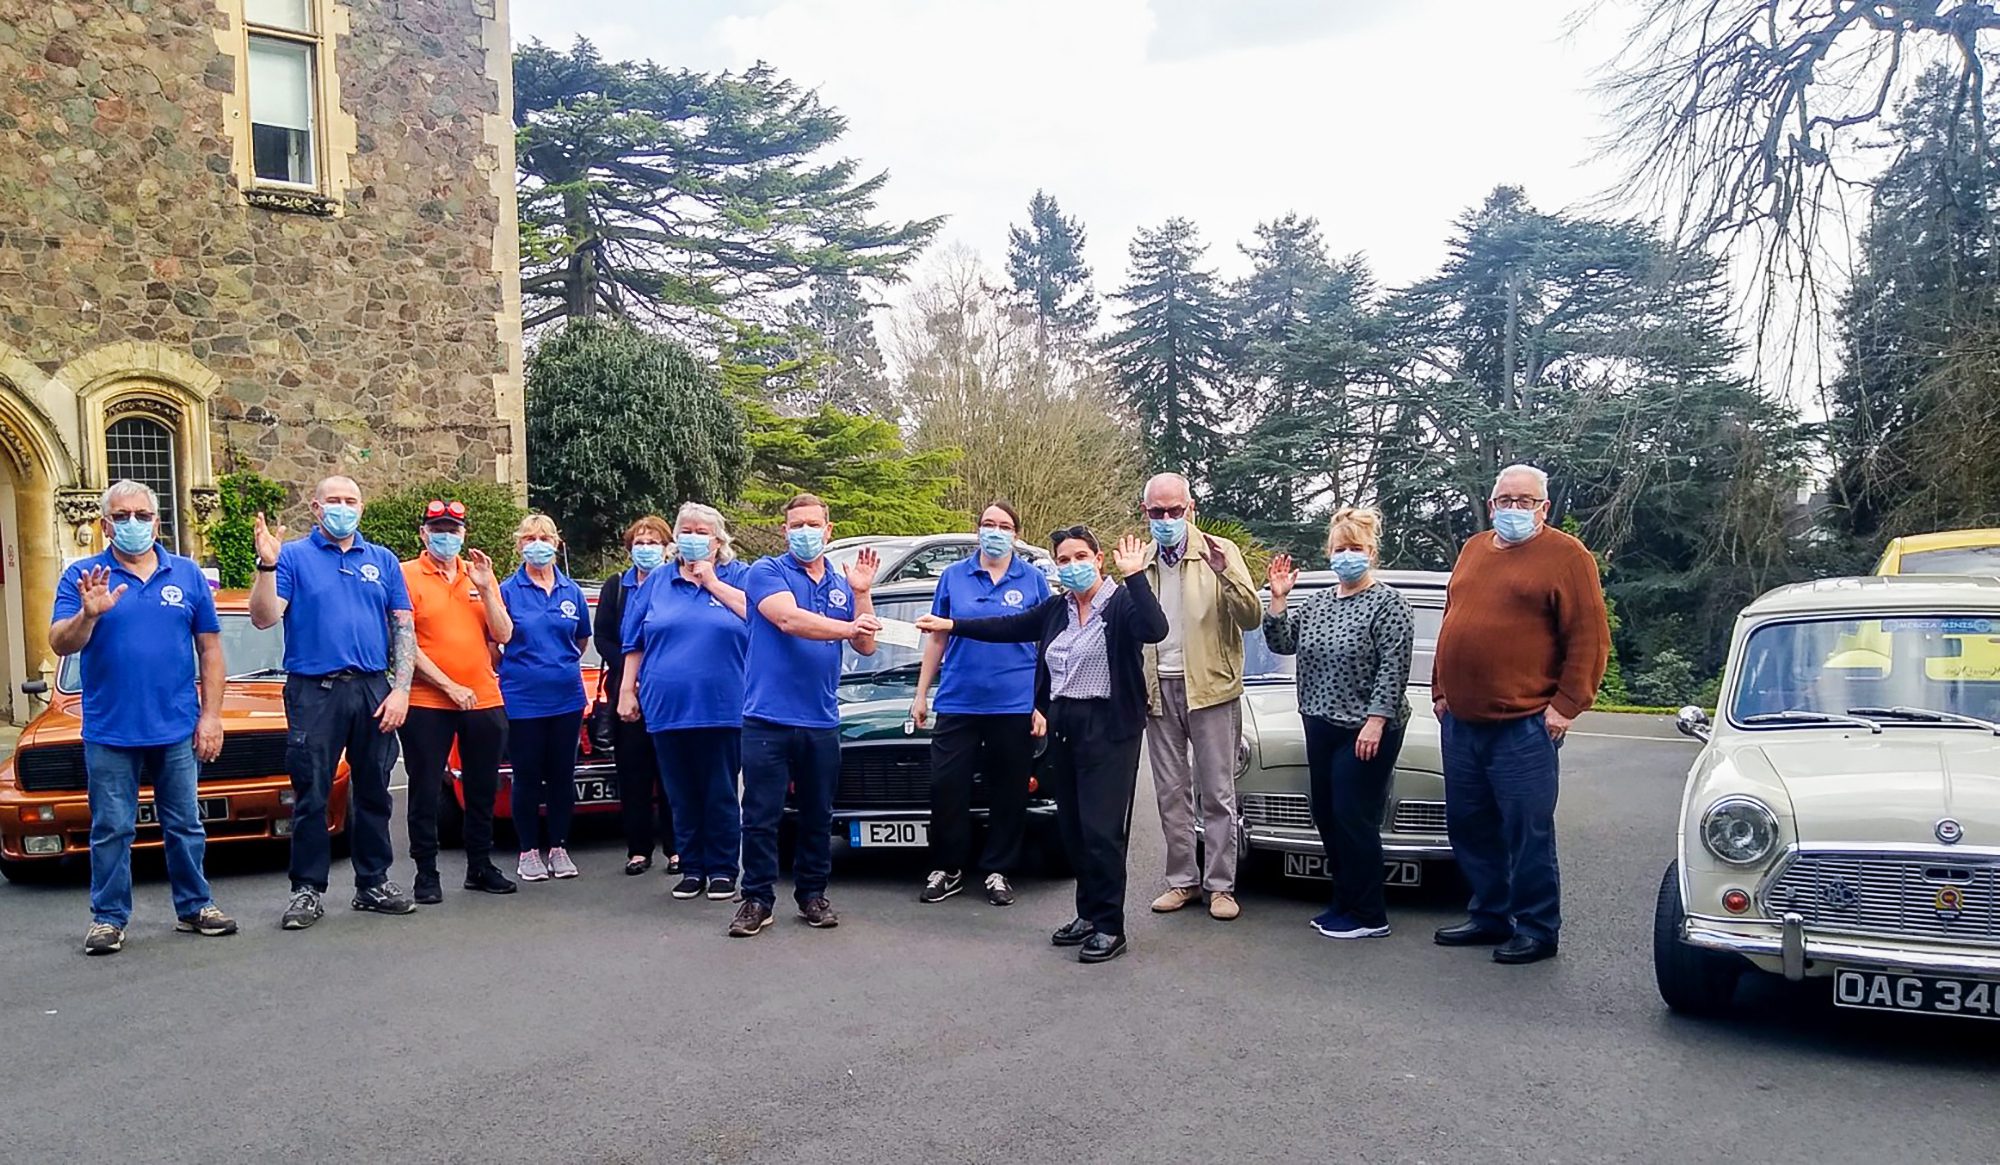 Mercia Mini Car Club visiting our Malvern Day Care - May highlights